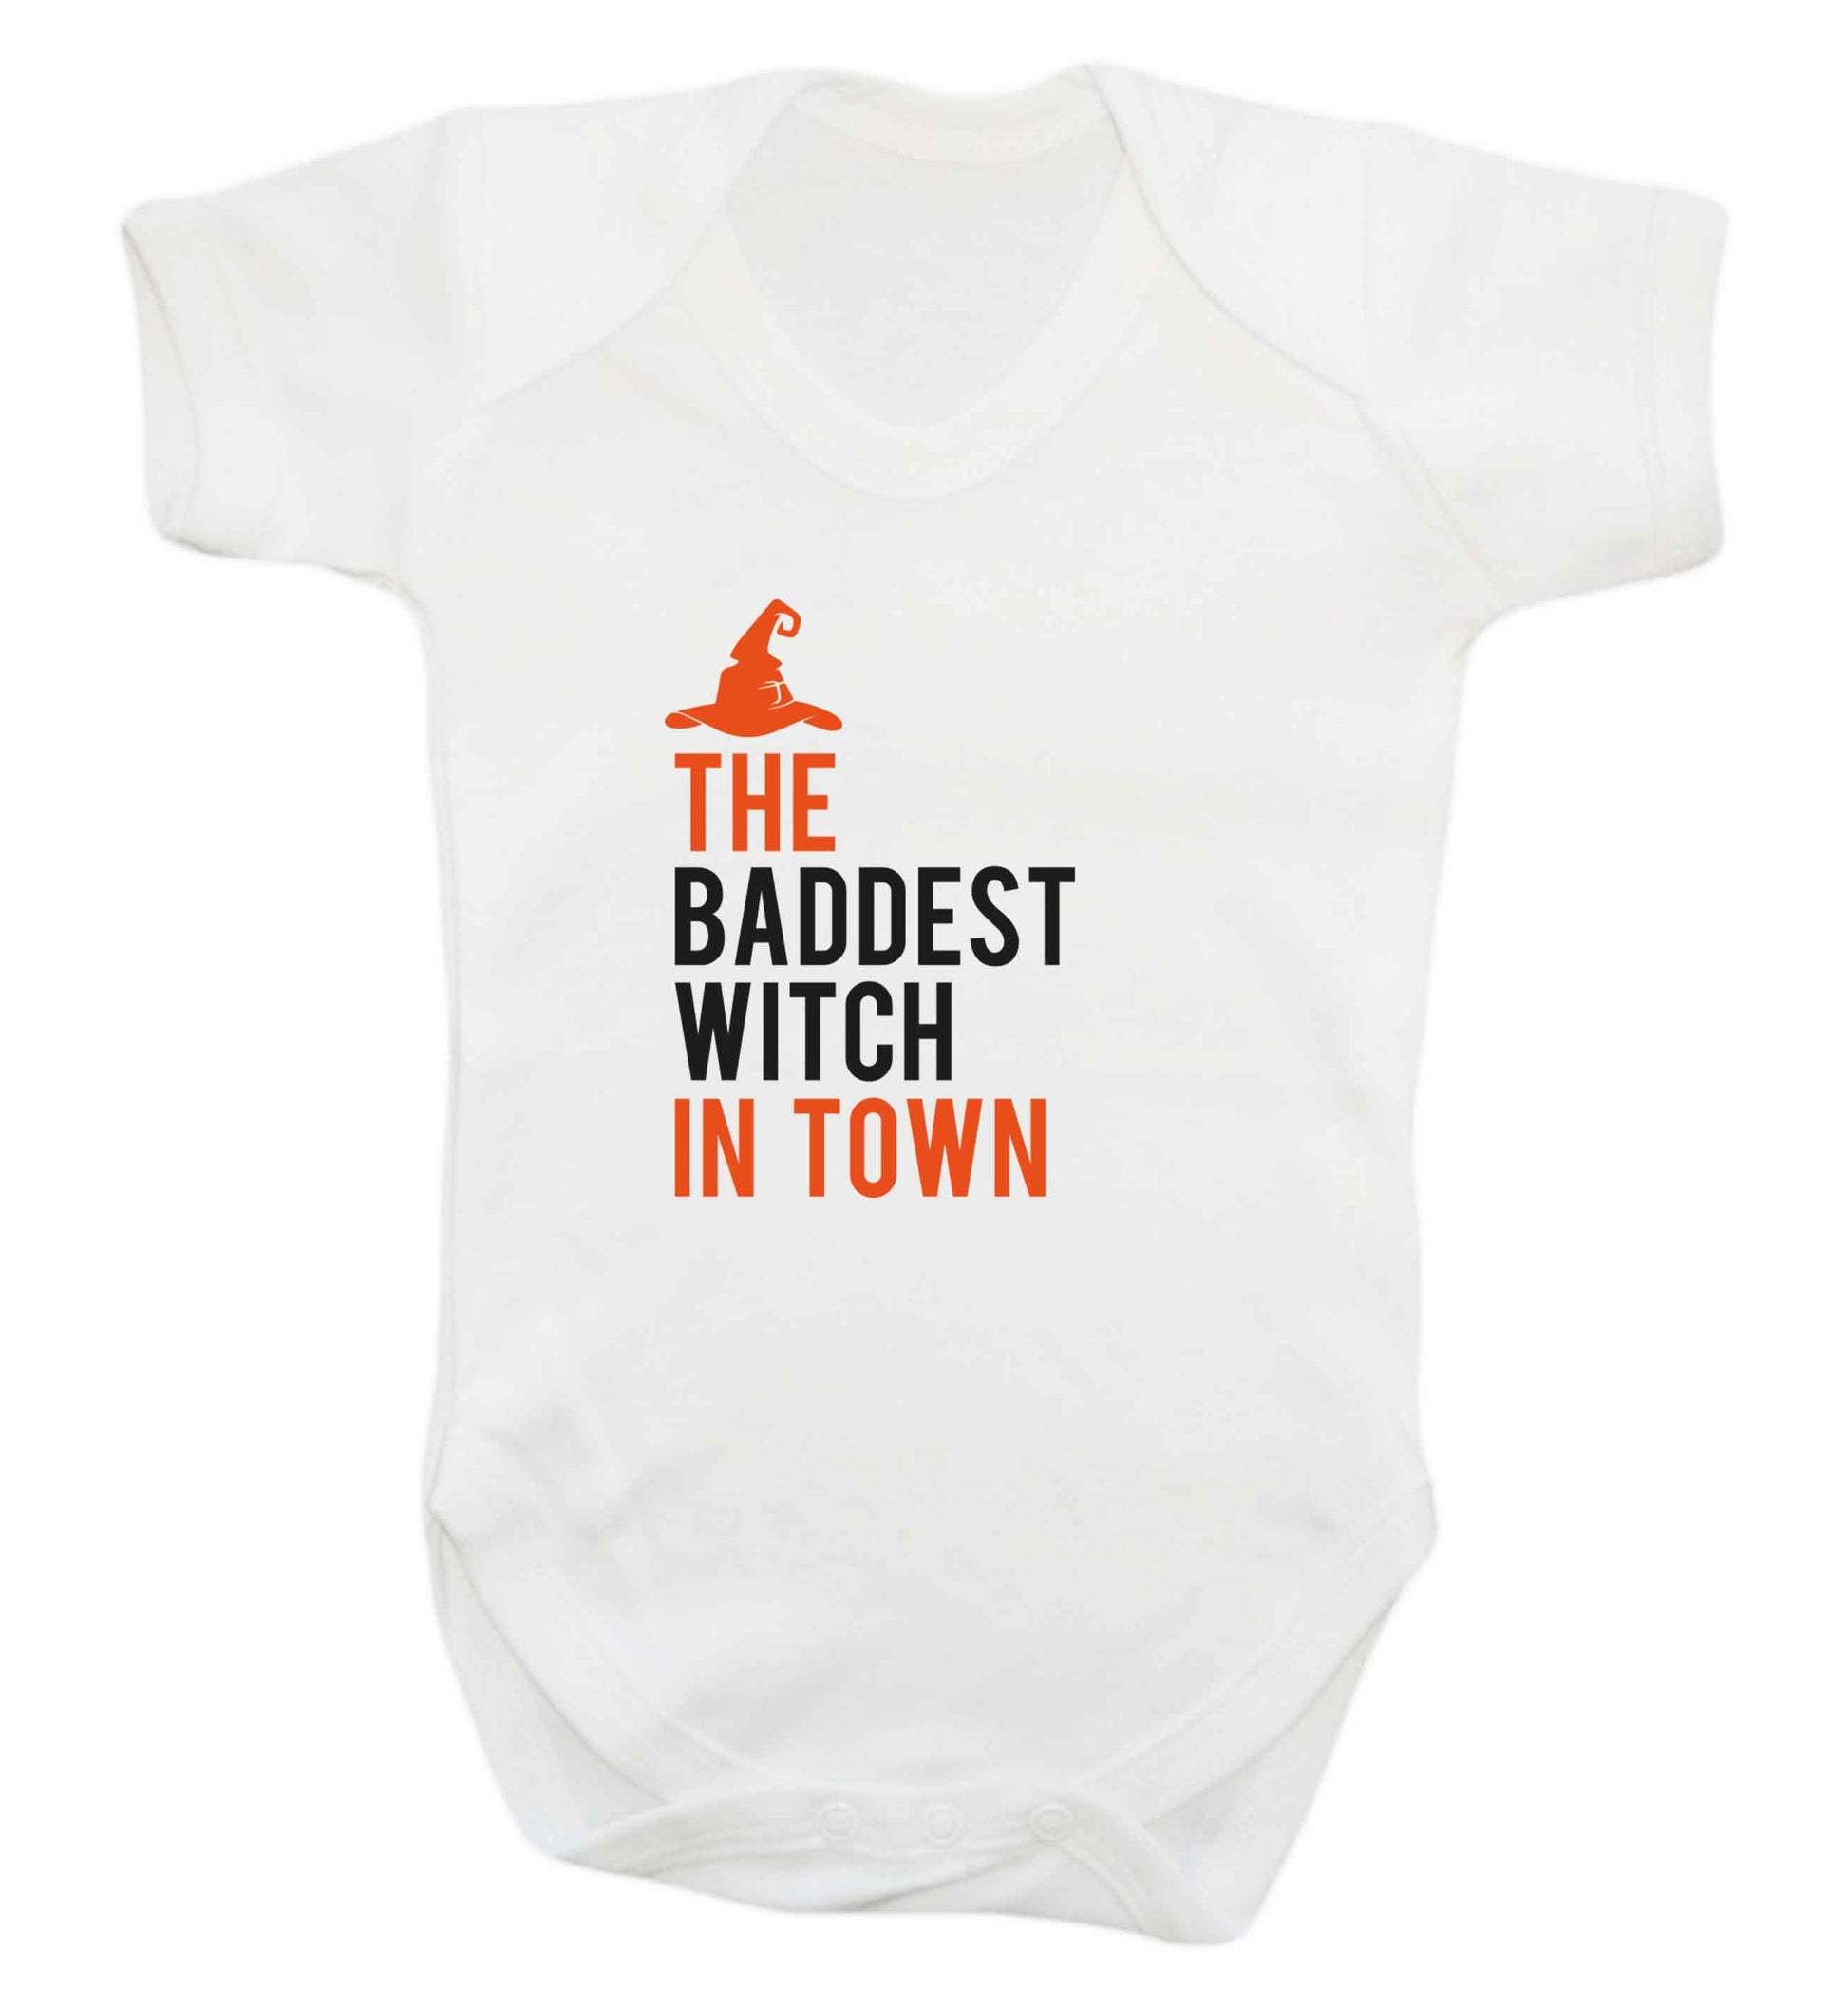 Badest witch in town baby vest white 18-24 months